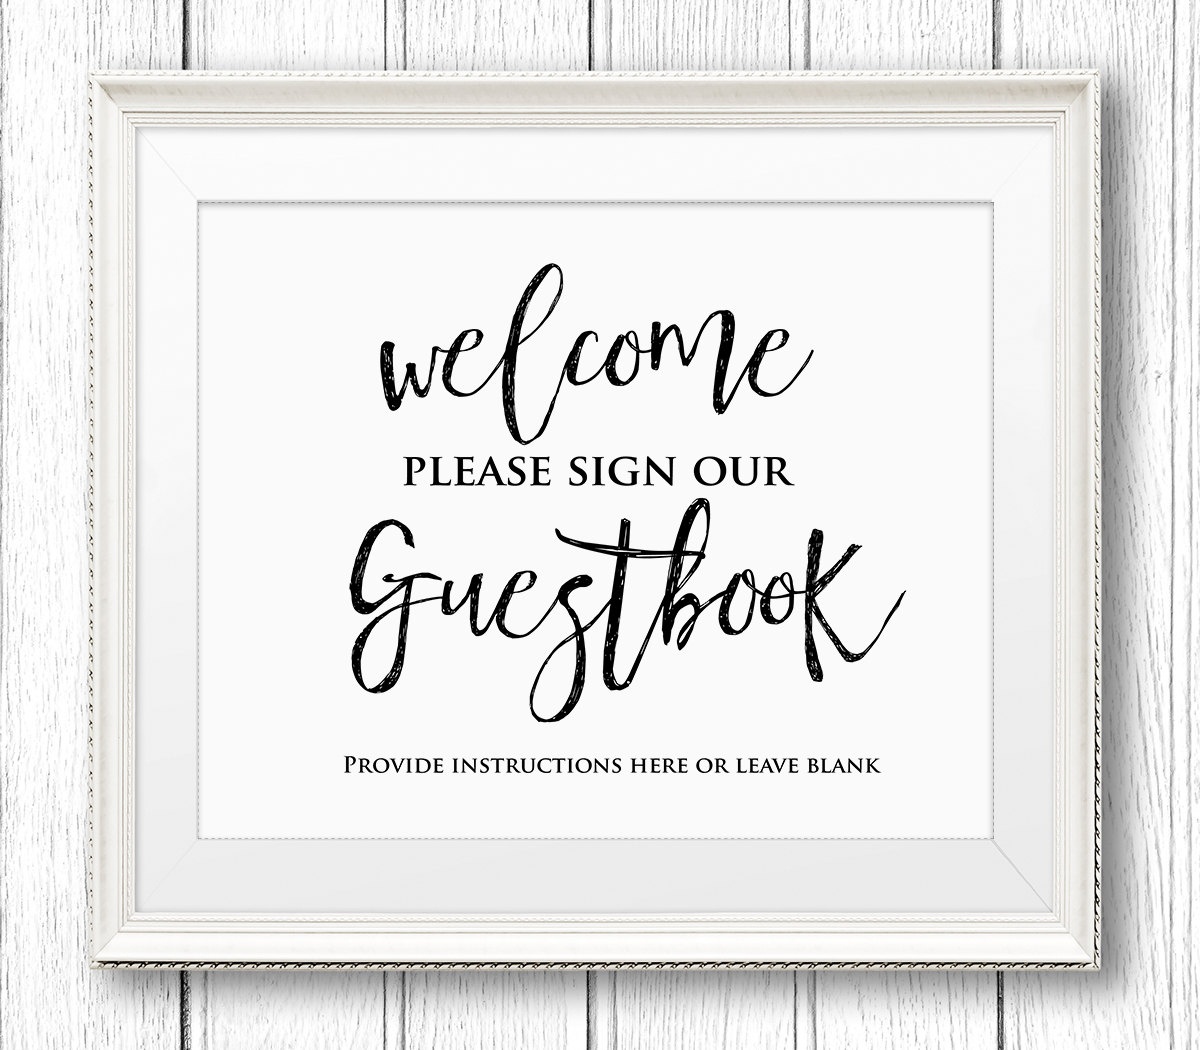 Printable Guest Book - Kaza.psstech.co - Please Sign Our Guestbook Free Printable